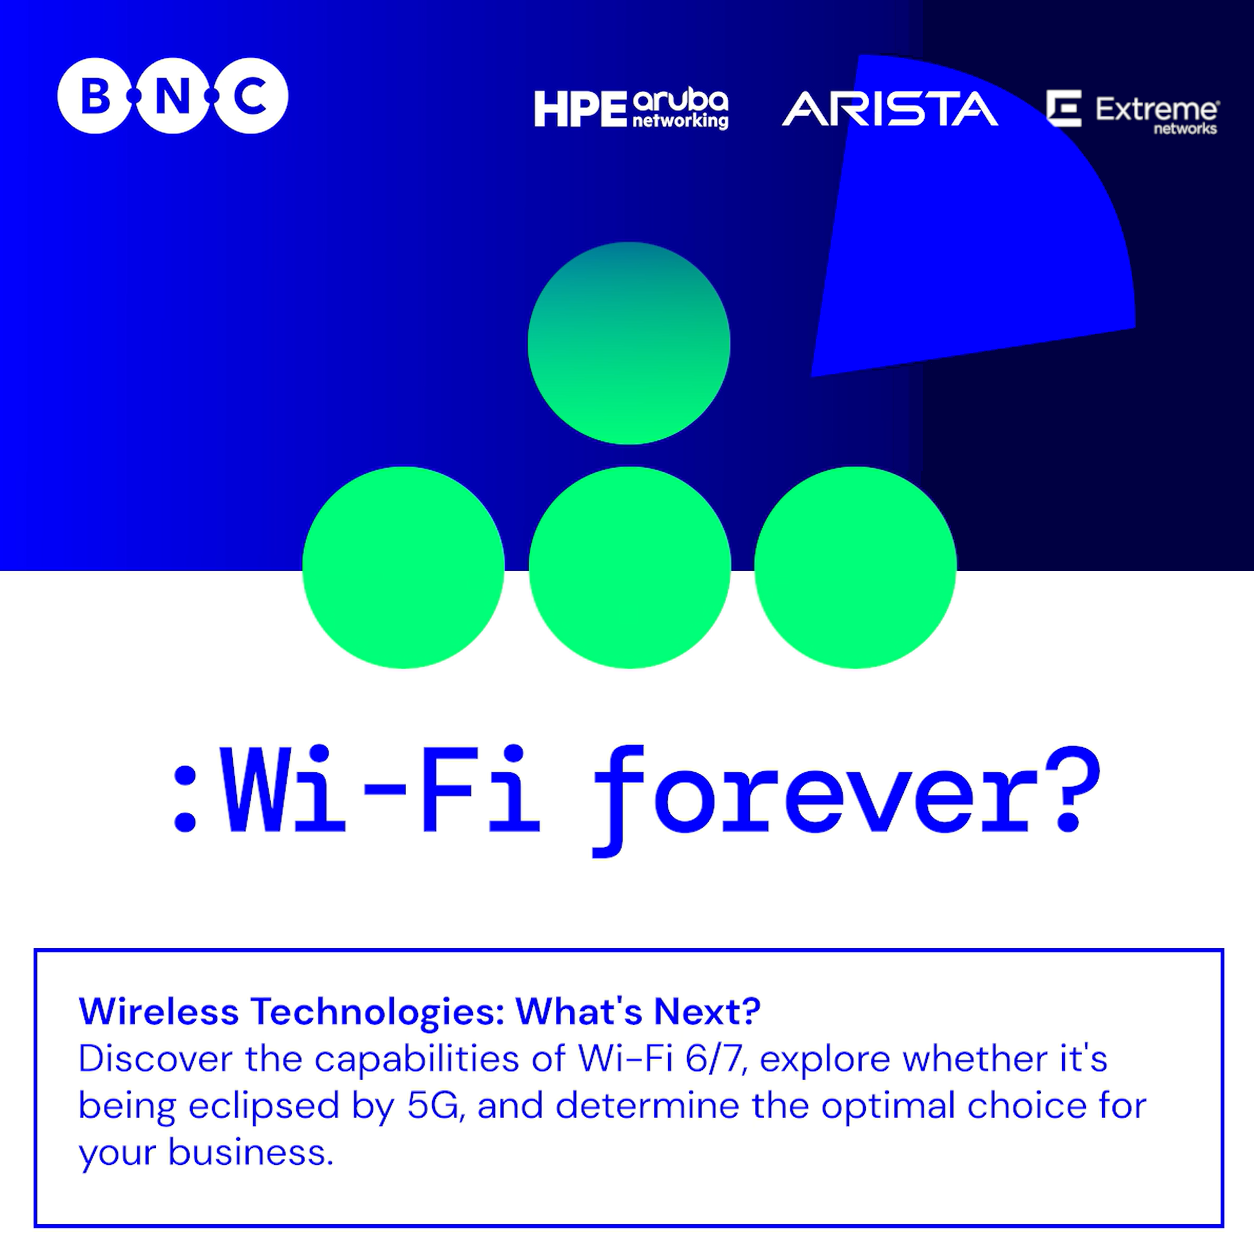 The new Wi-Fi Forever campaign provides insight into the future of wireless technologies